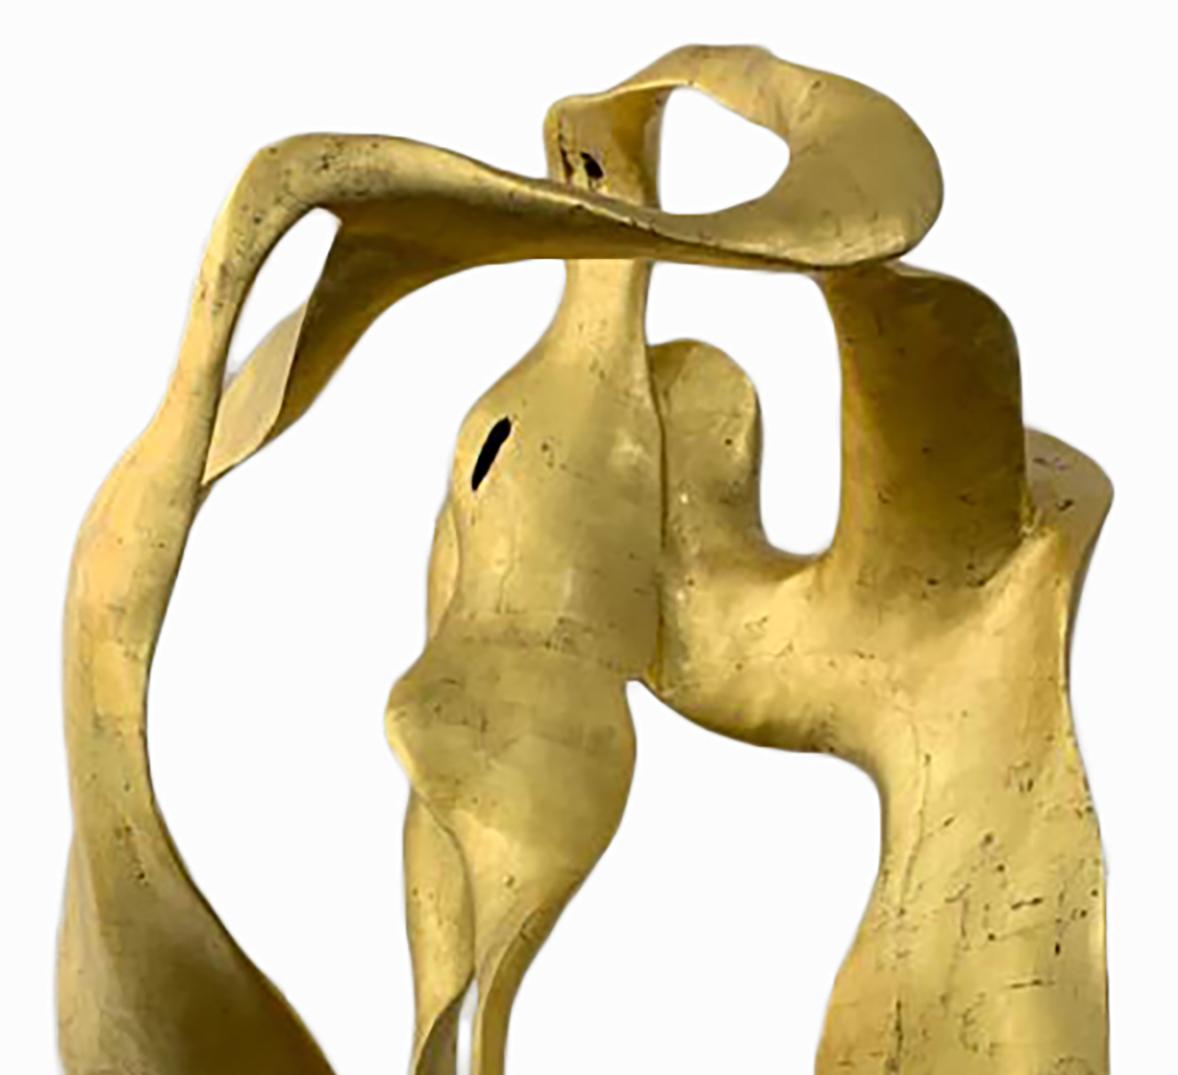 Bosc - 21st Cent, Contemporary, Abstract Sculpture, Mahogany Wood, Gold Leaf 1